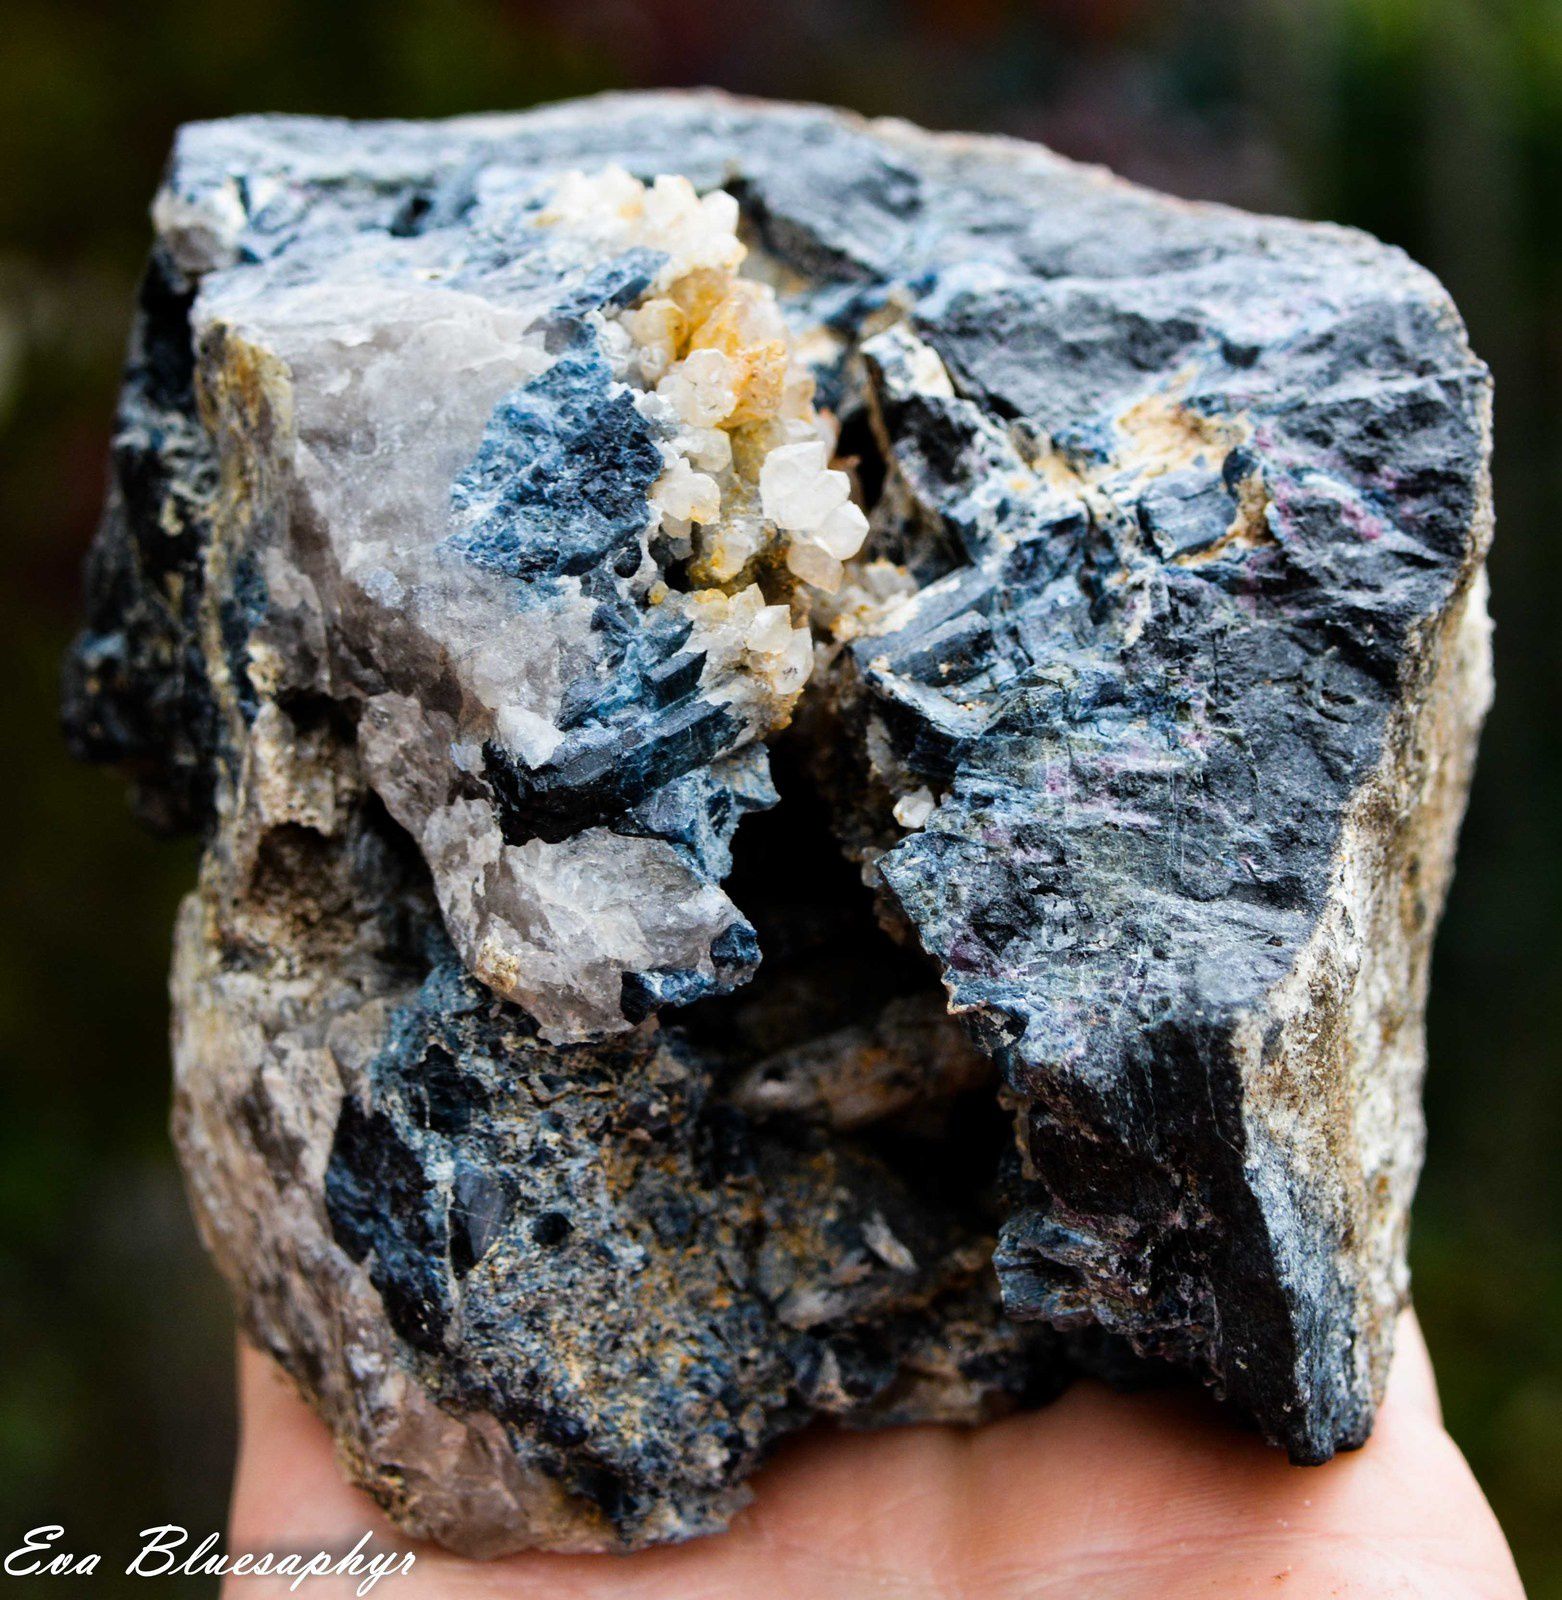 Indigolite (Blue Tourmaline) with Calcite from Madagascar (size: Cabinet)